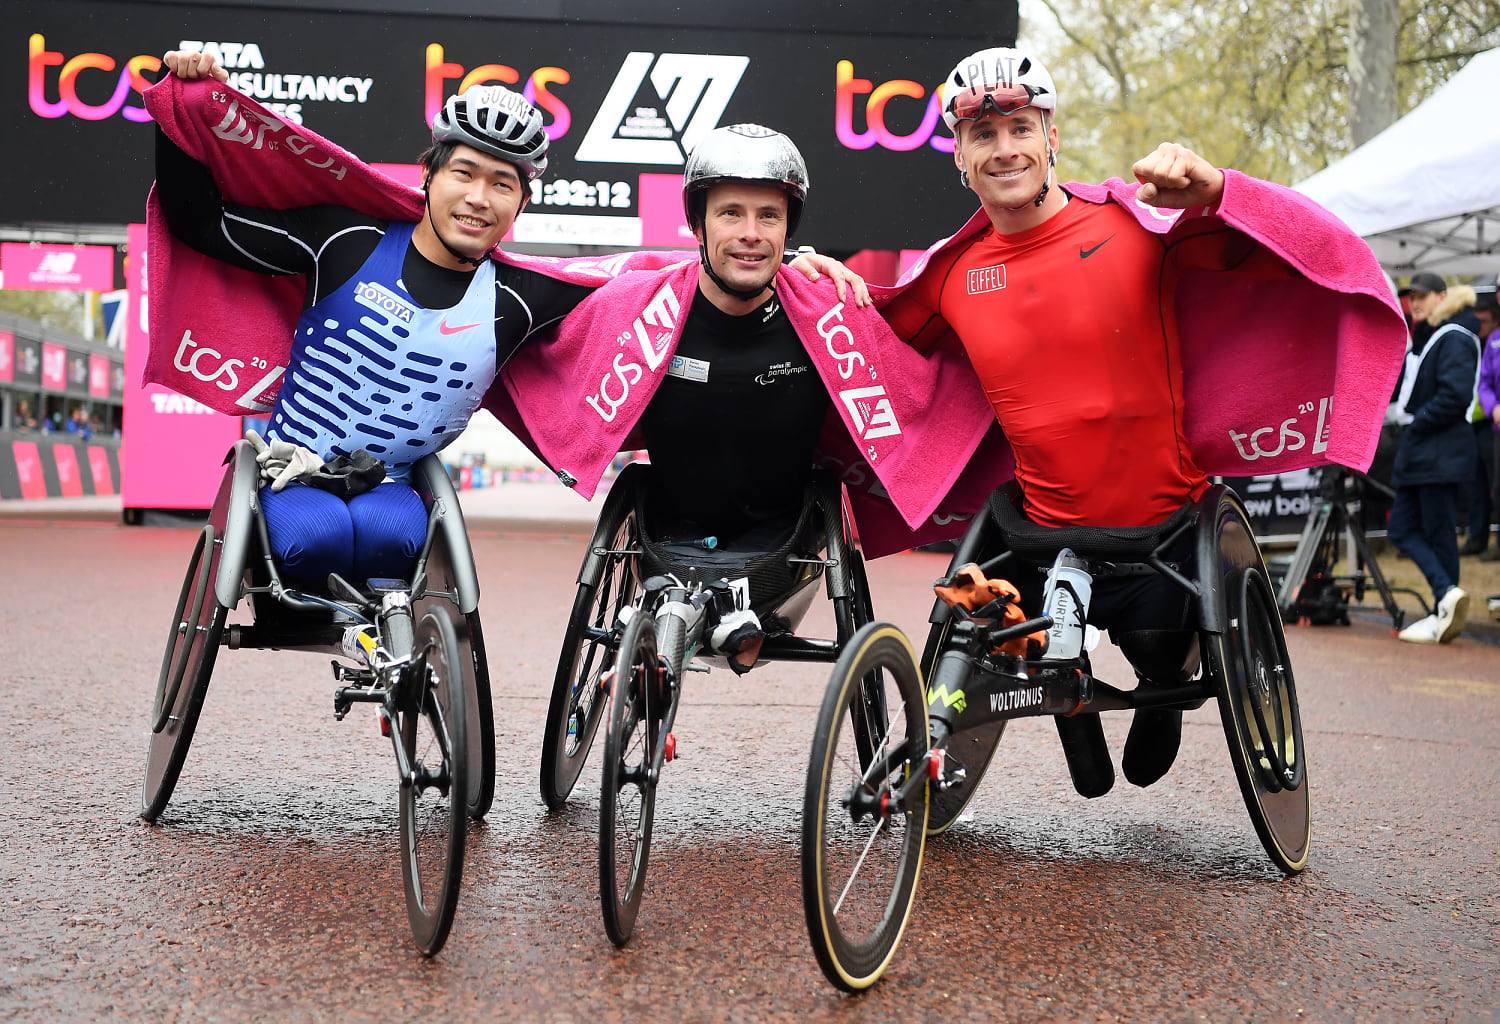 In a first, London Marathon to award wheelchair and non-disabled athletes equal prize money